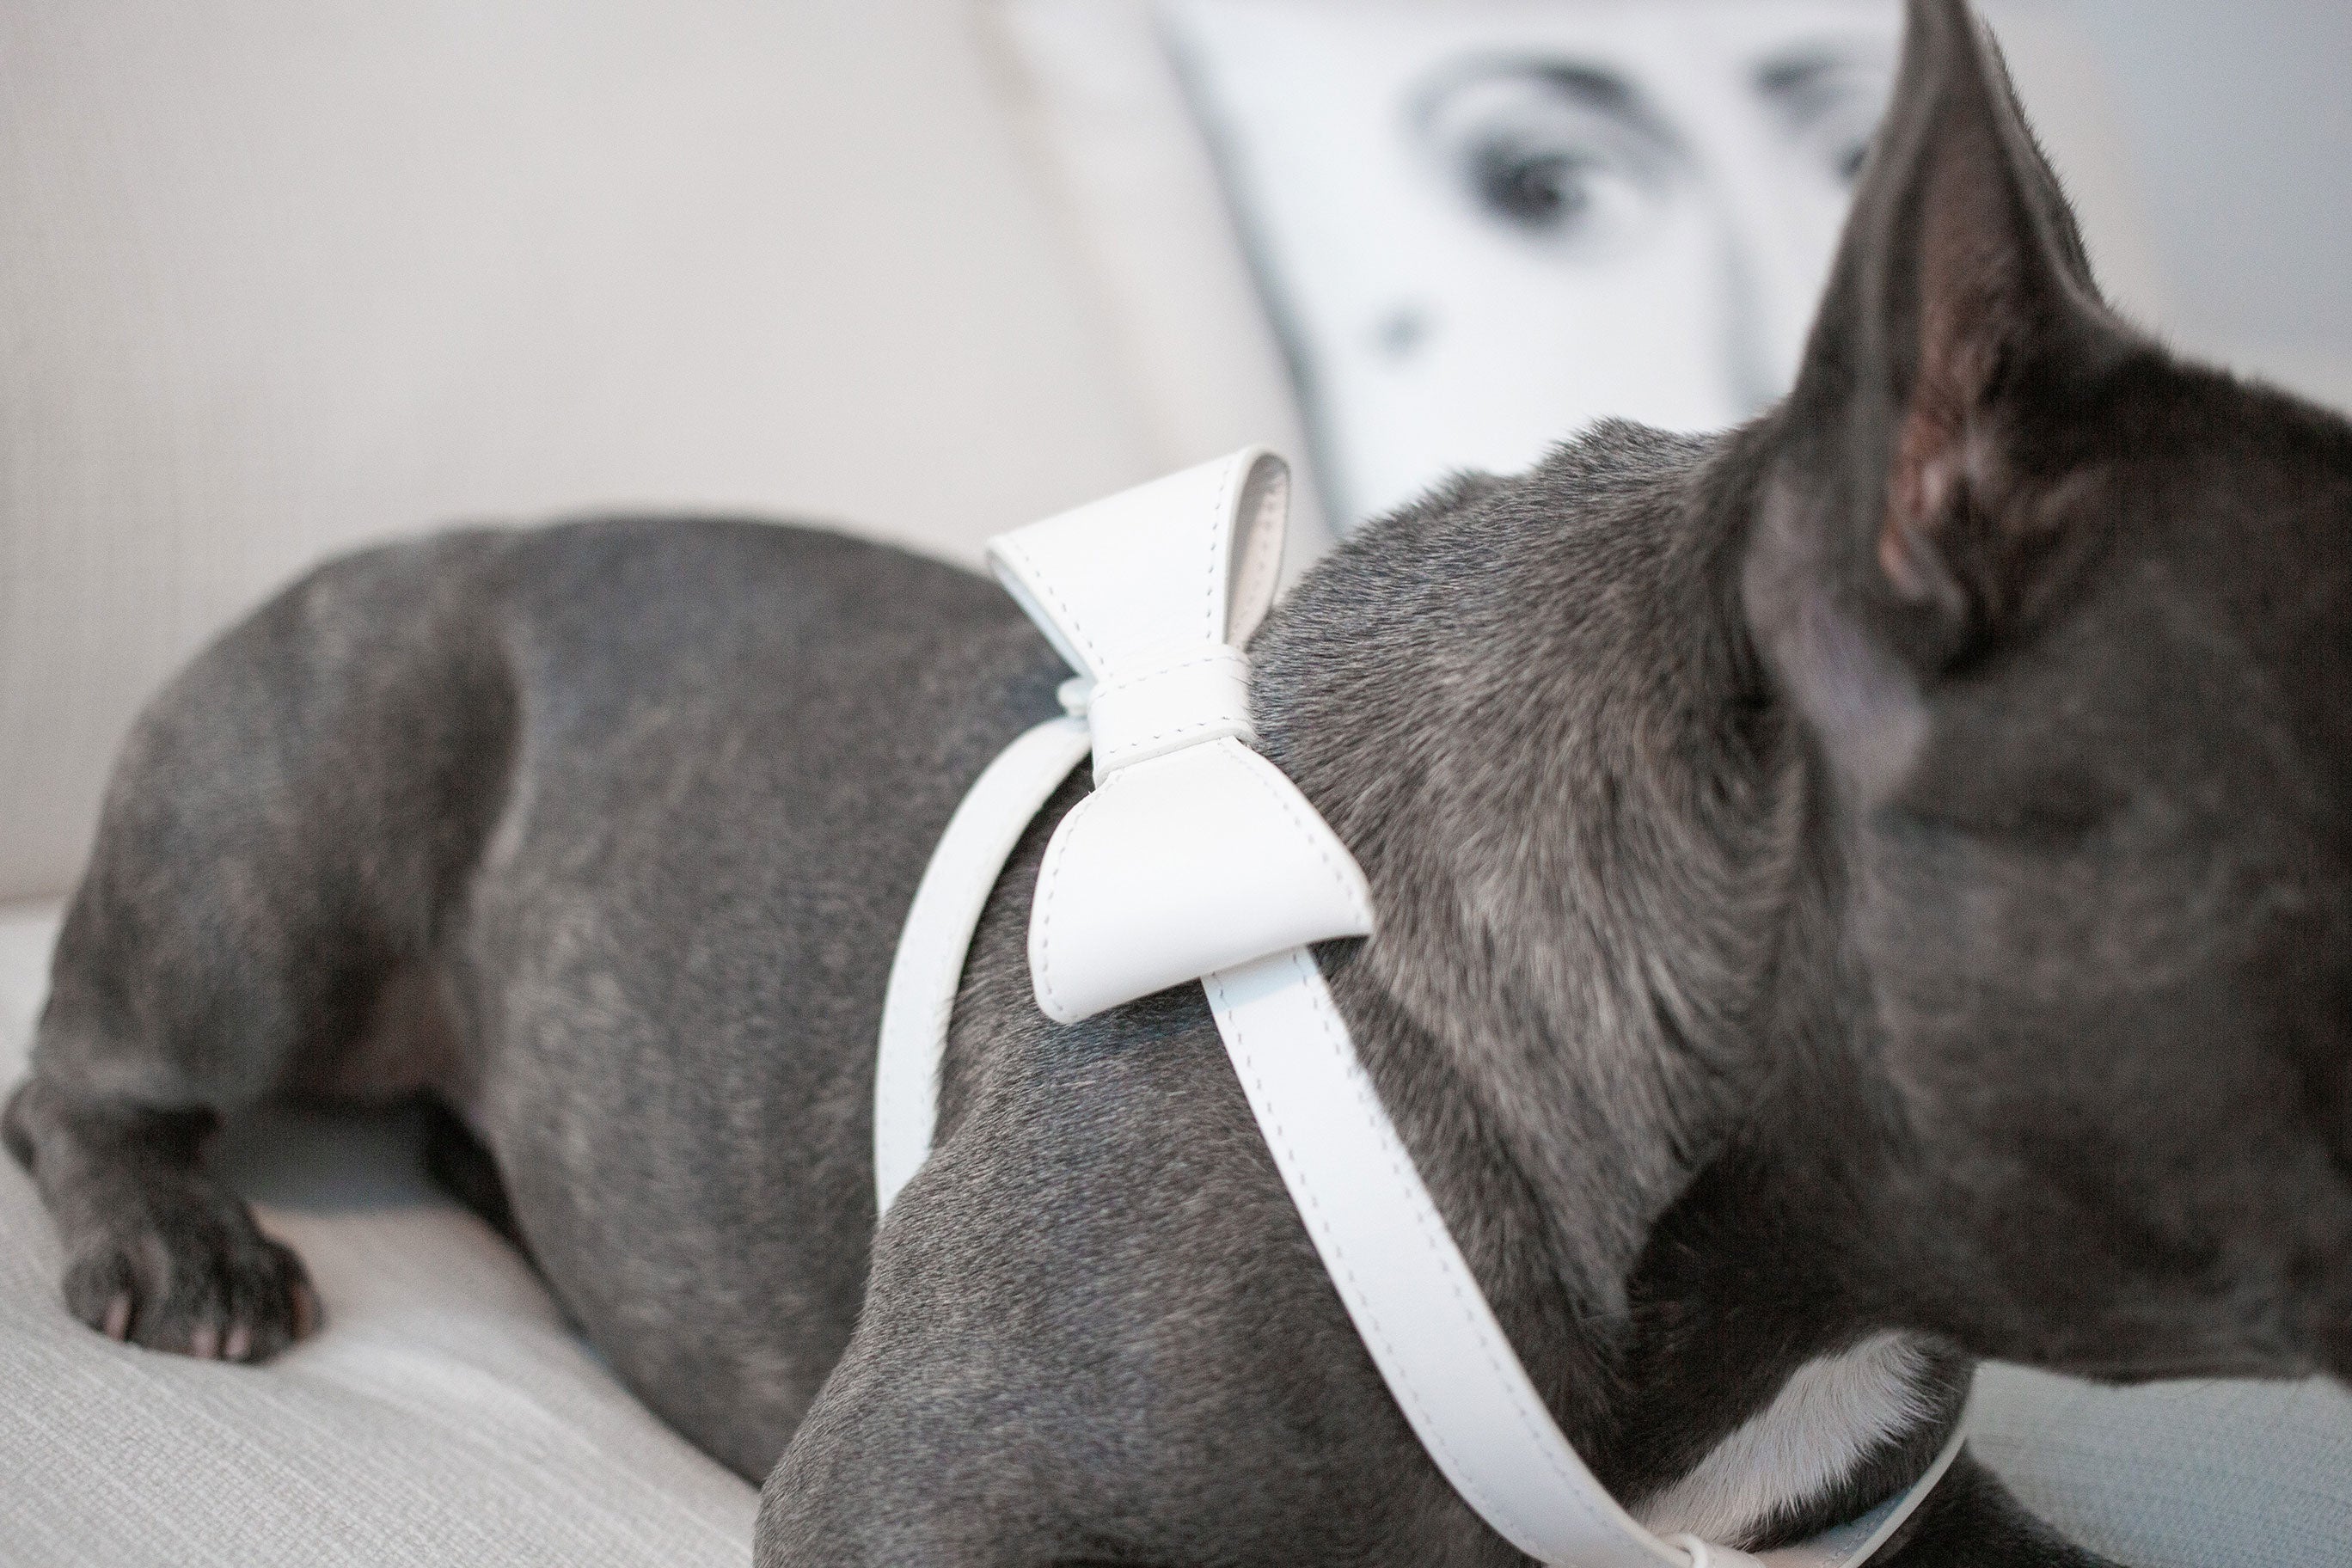 Off White leather Harness with removable bow